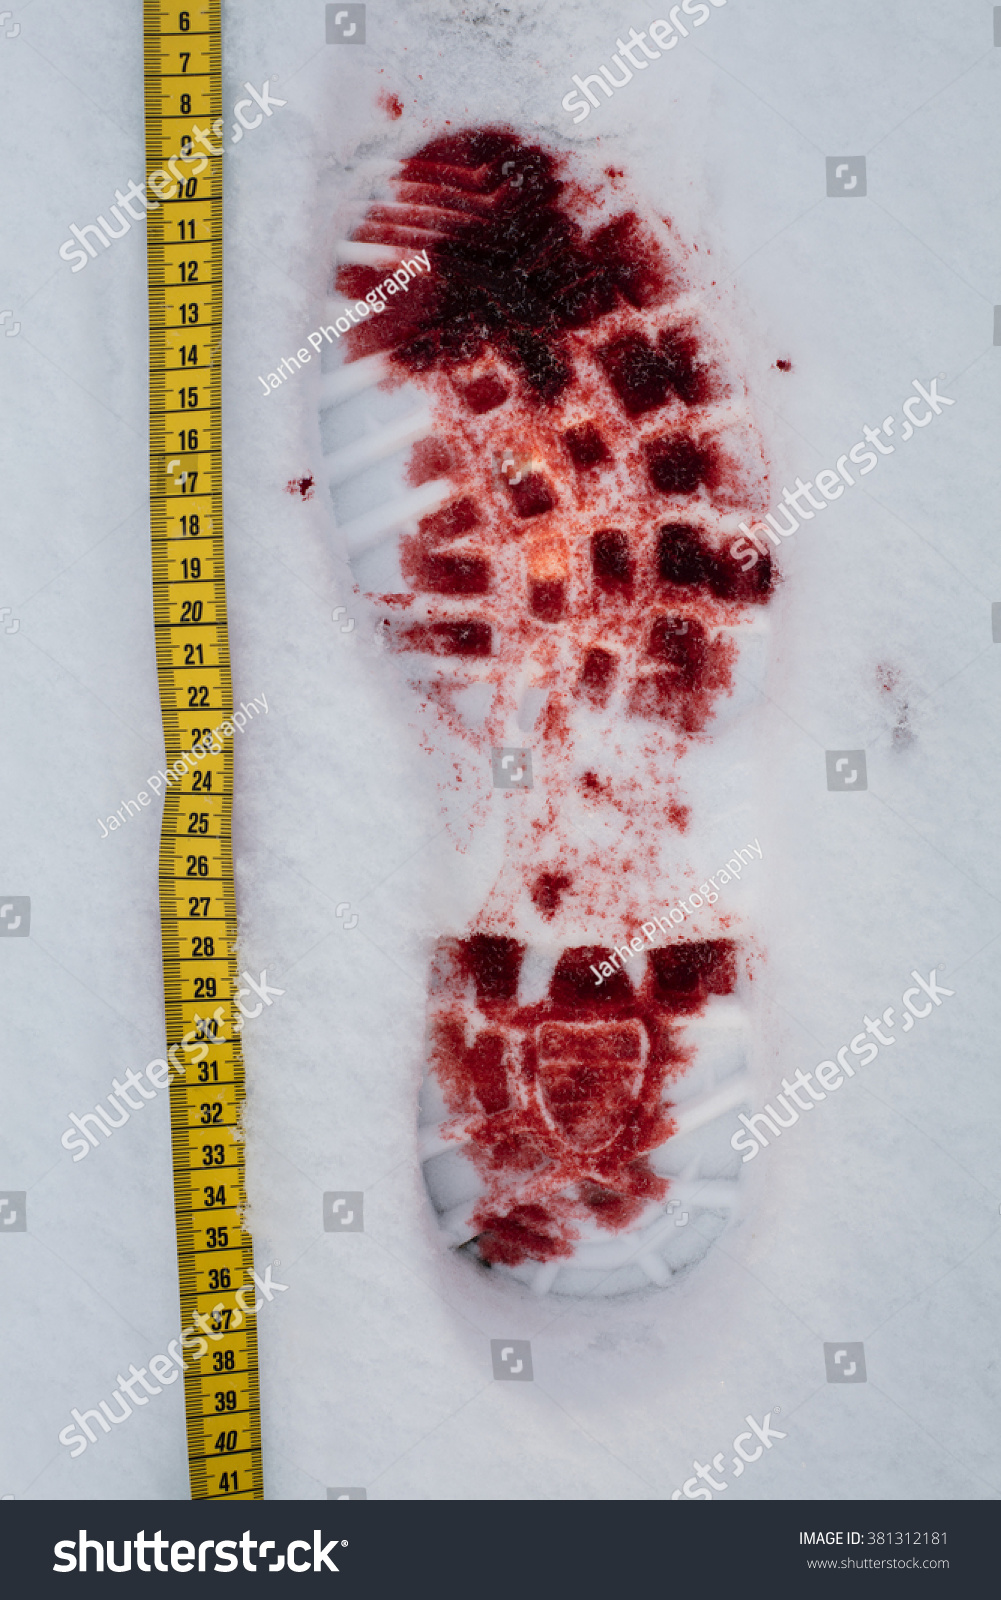 Image result for bloody boot print